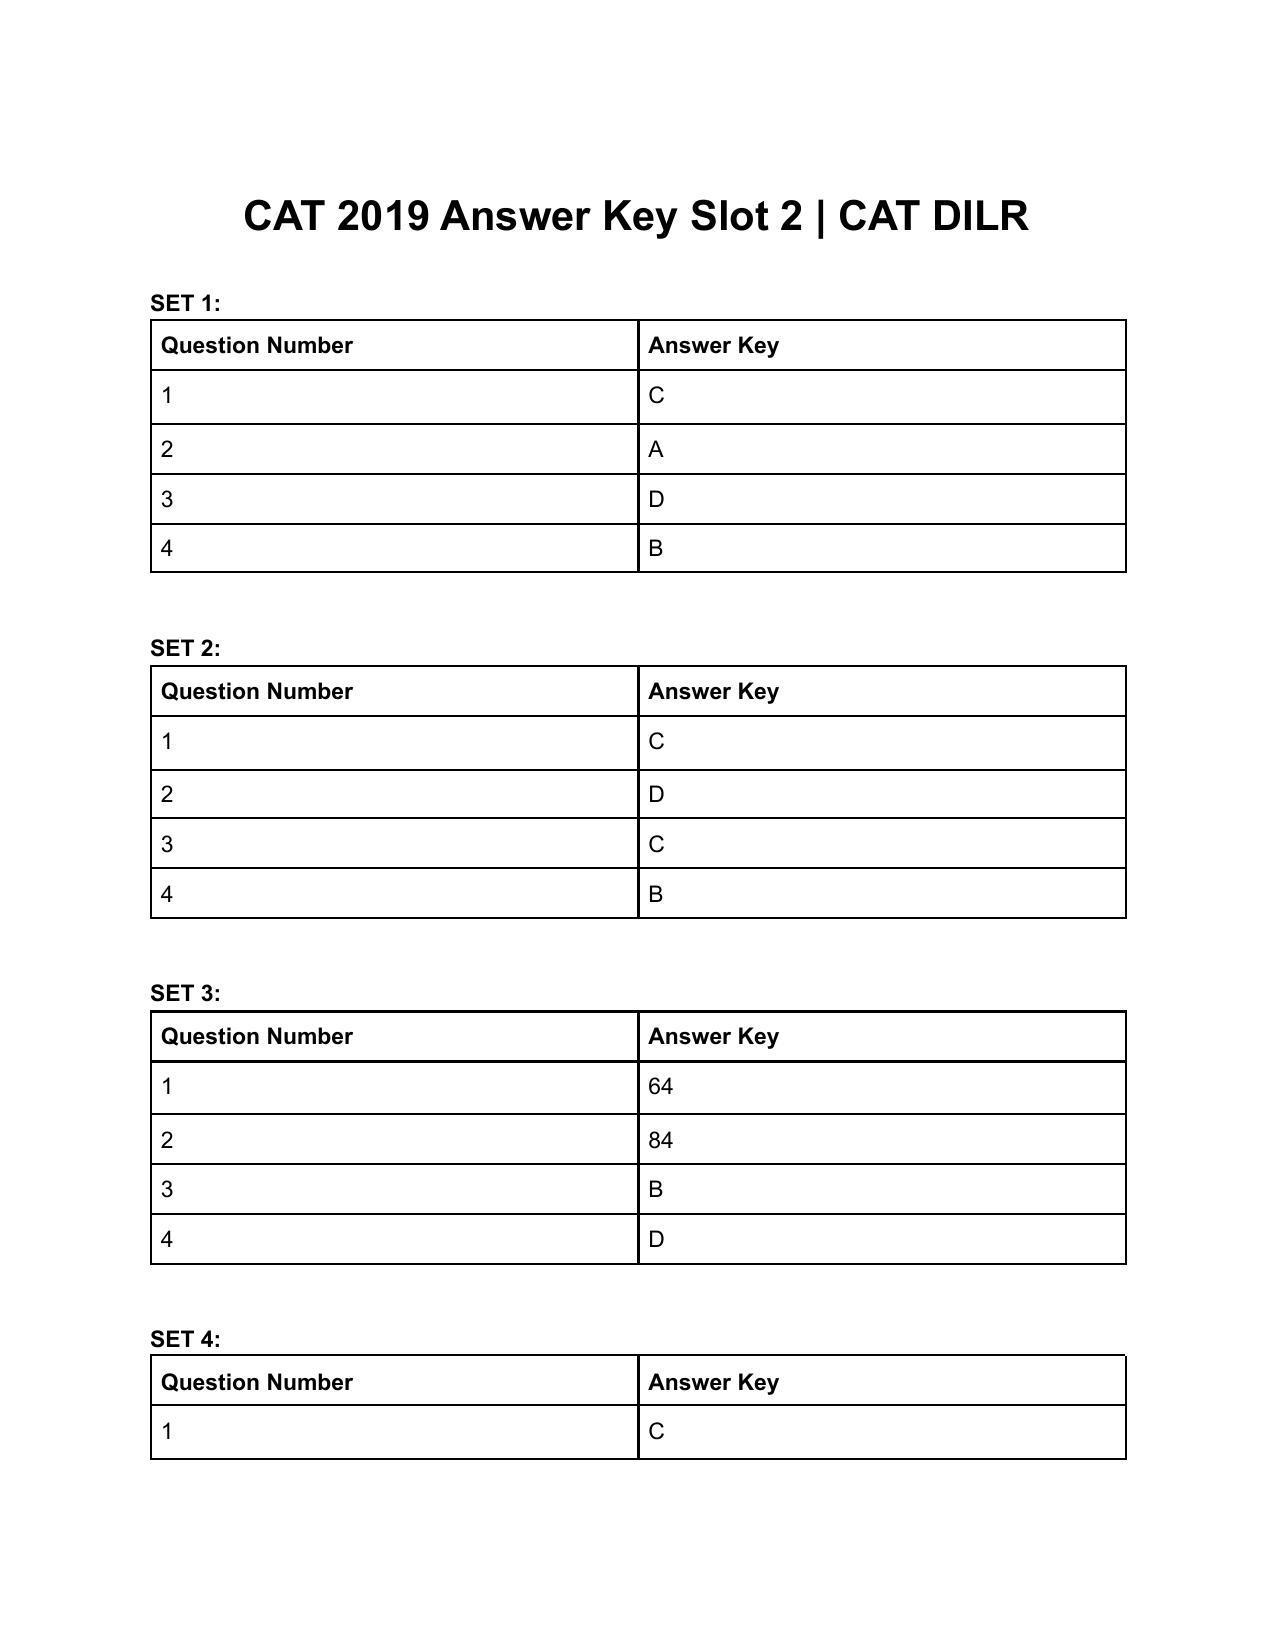 CAT 2019 CAT DILR Slot 2 Answer Key - Page 1